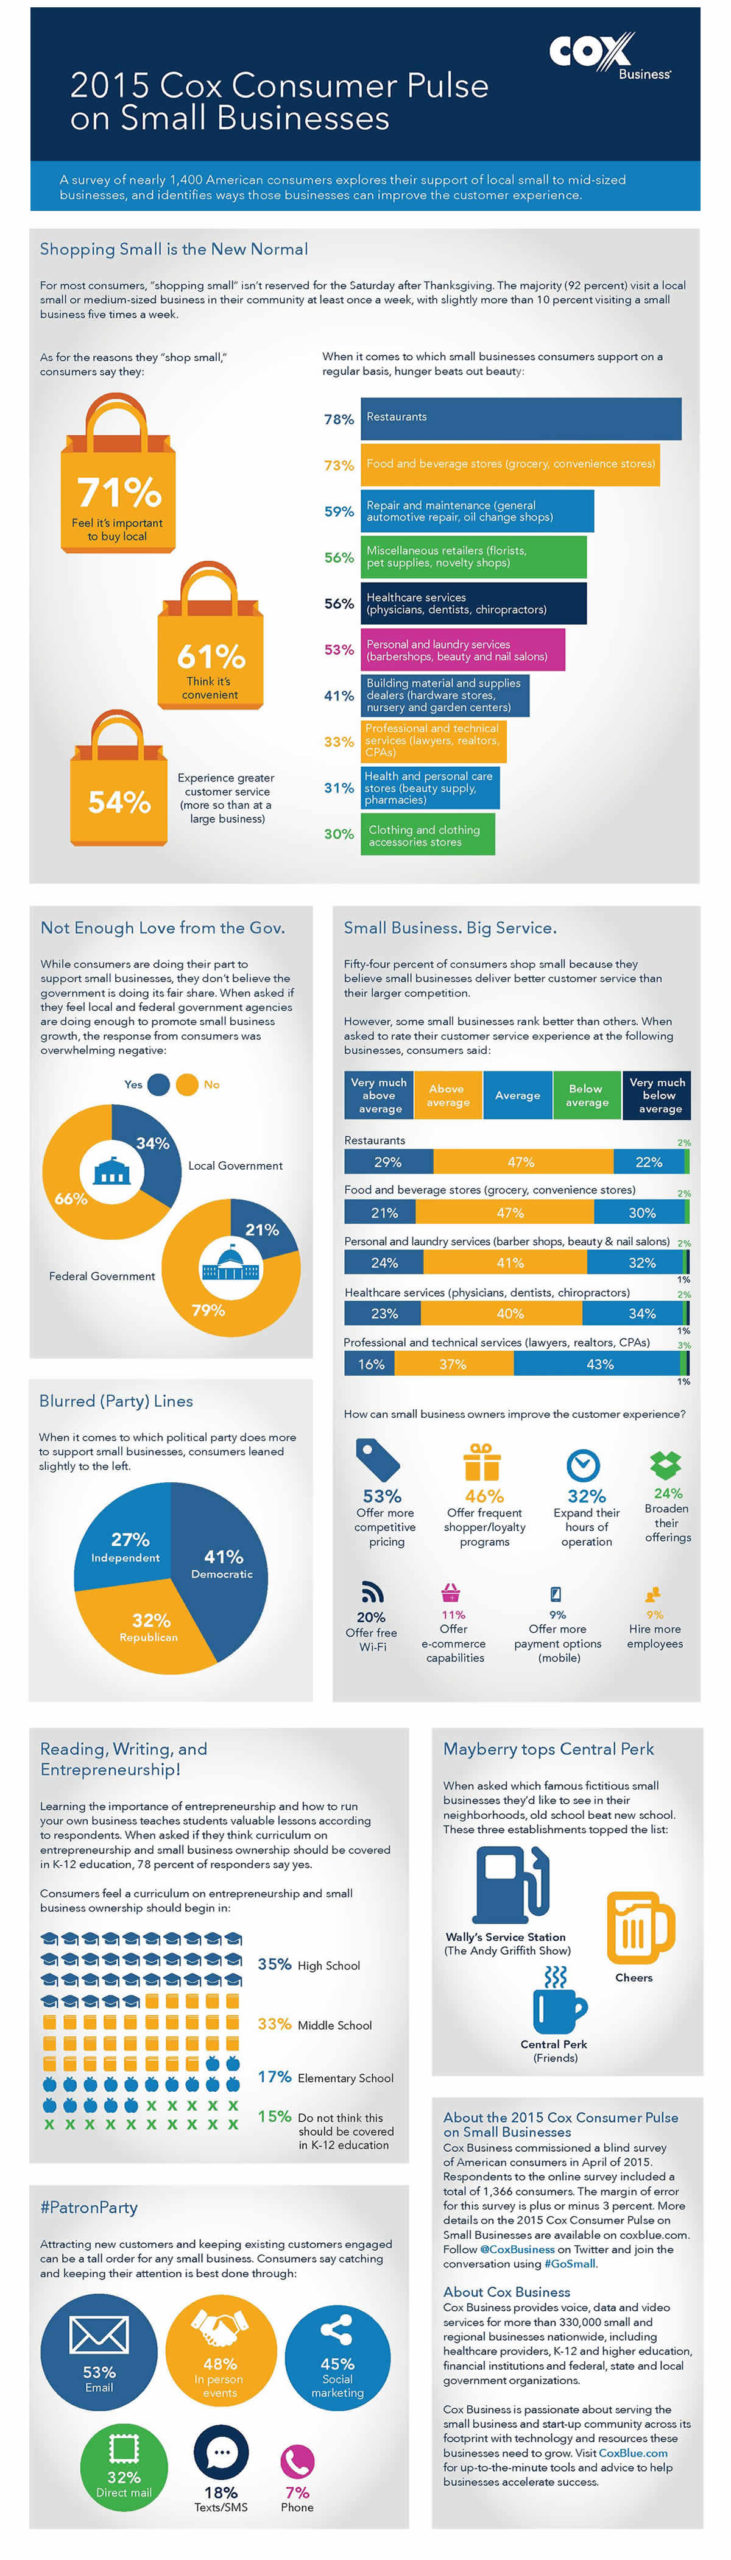 Cox Business Small Business Survey 2015